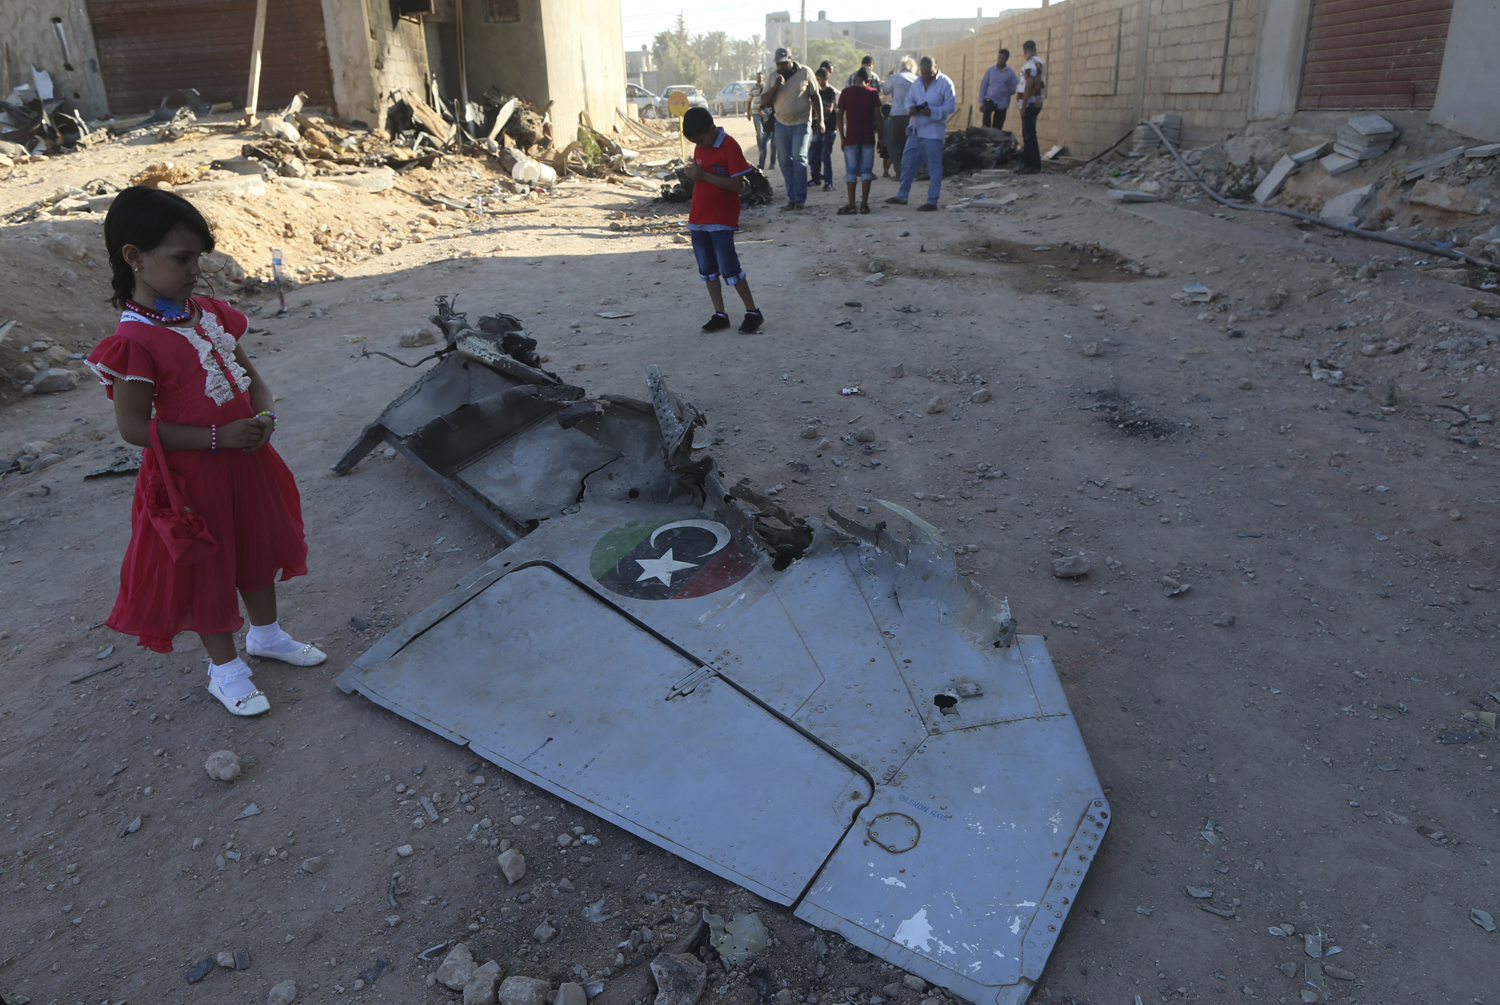 A girl stands next to the wreckage of a government MiG warplane which crashed during Tuesday's fighting, in Benghazi